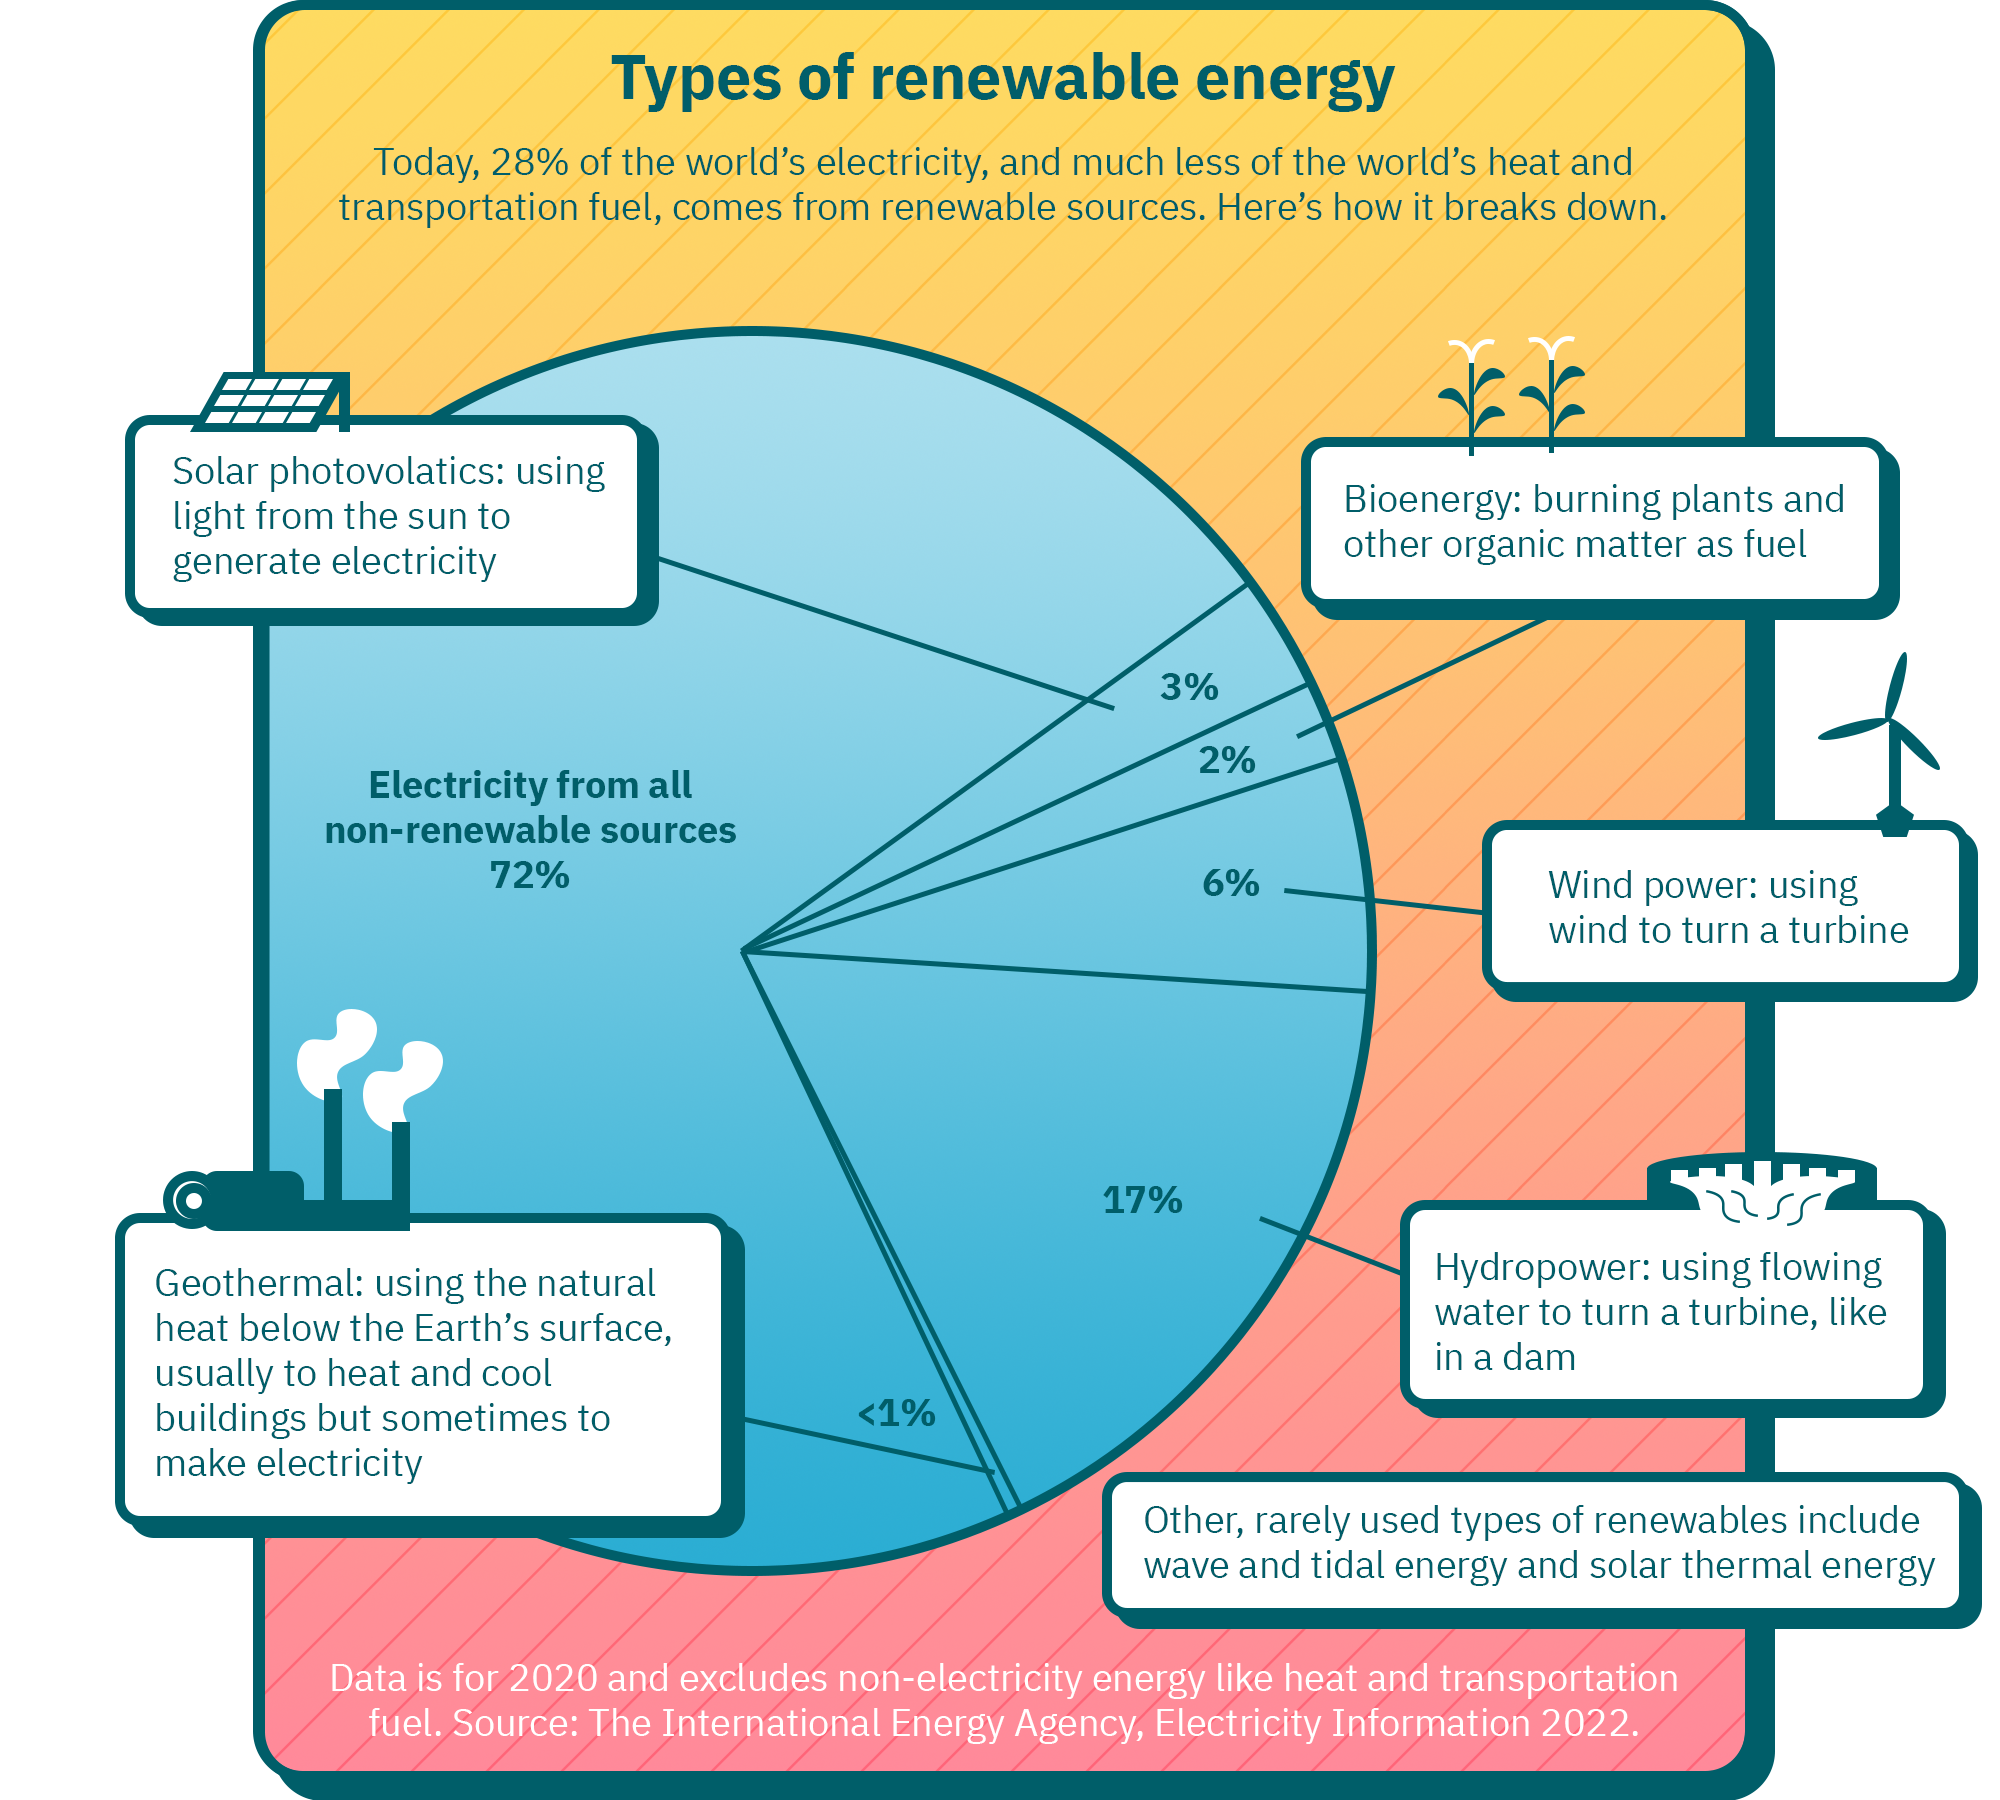 how does renewable energy reduce climate change?